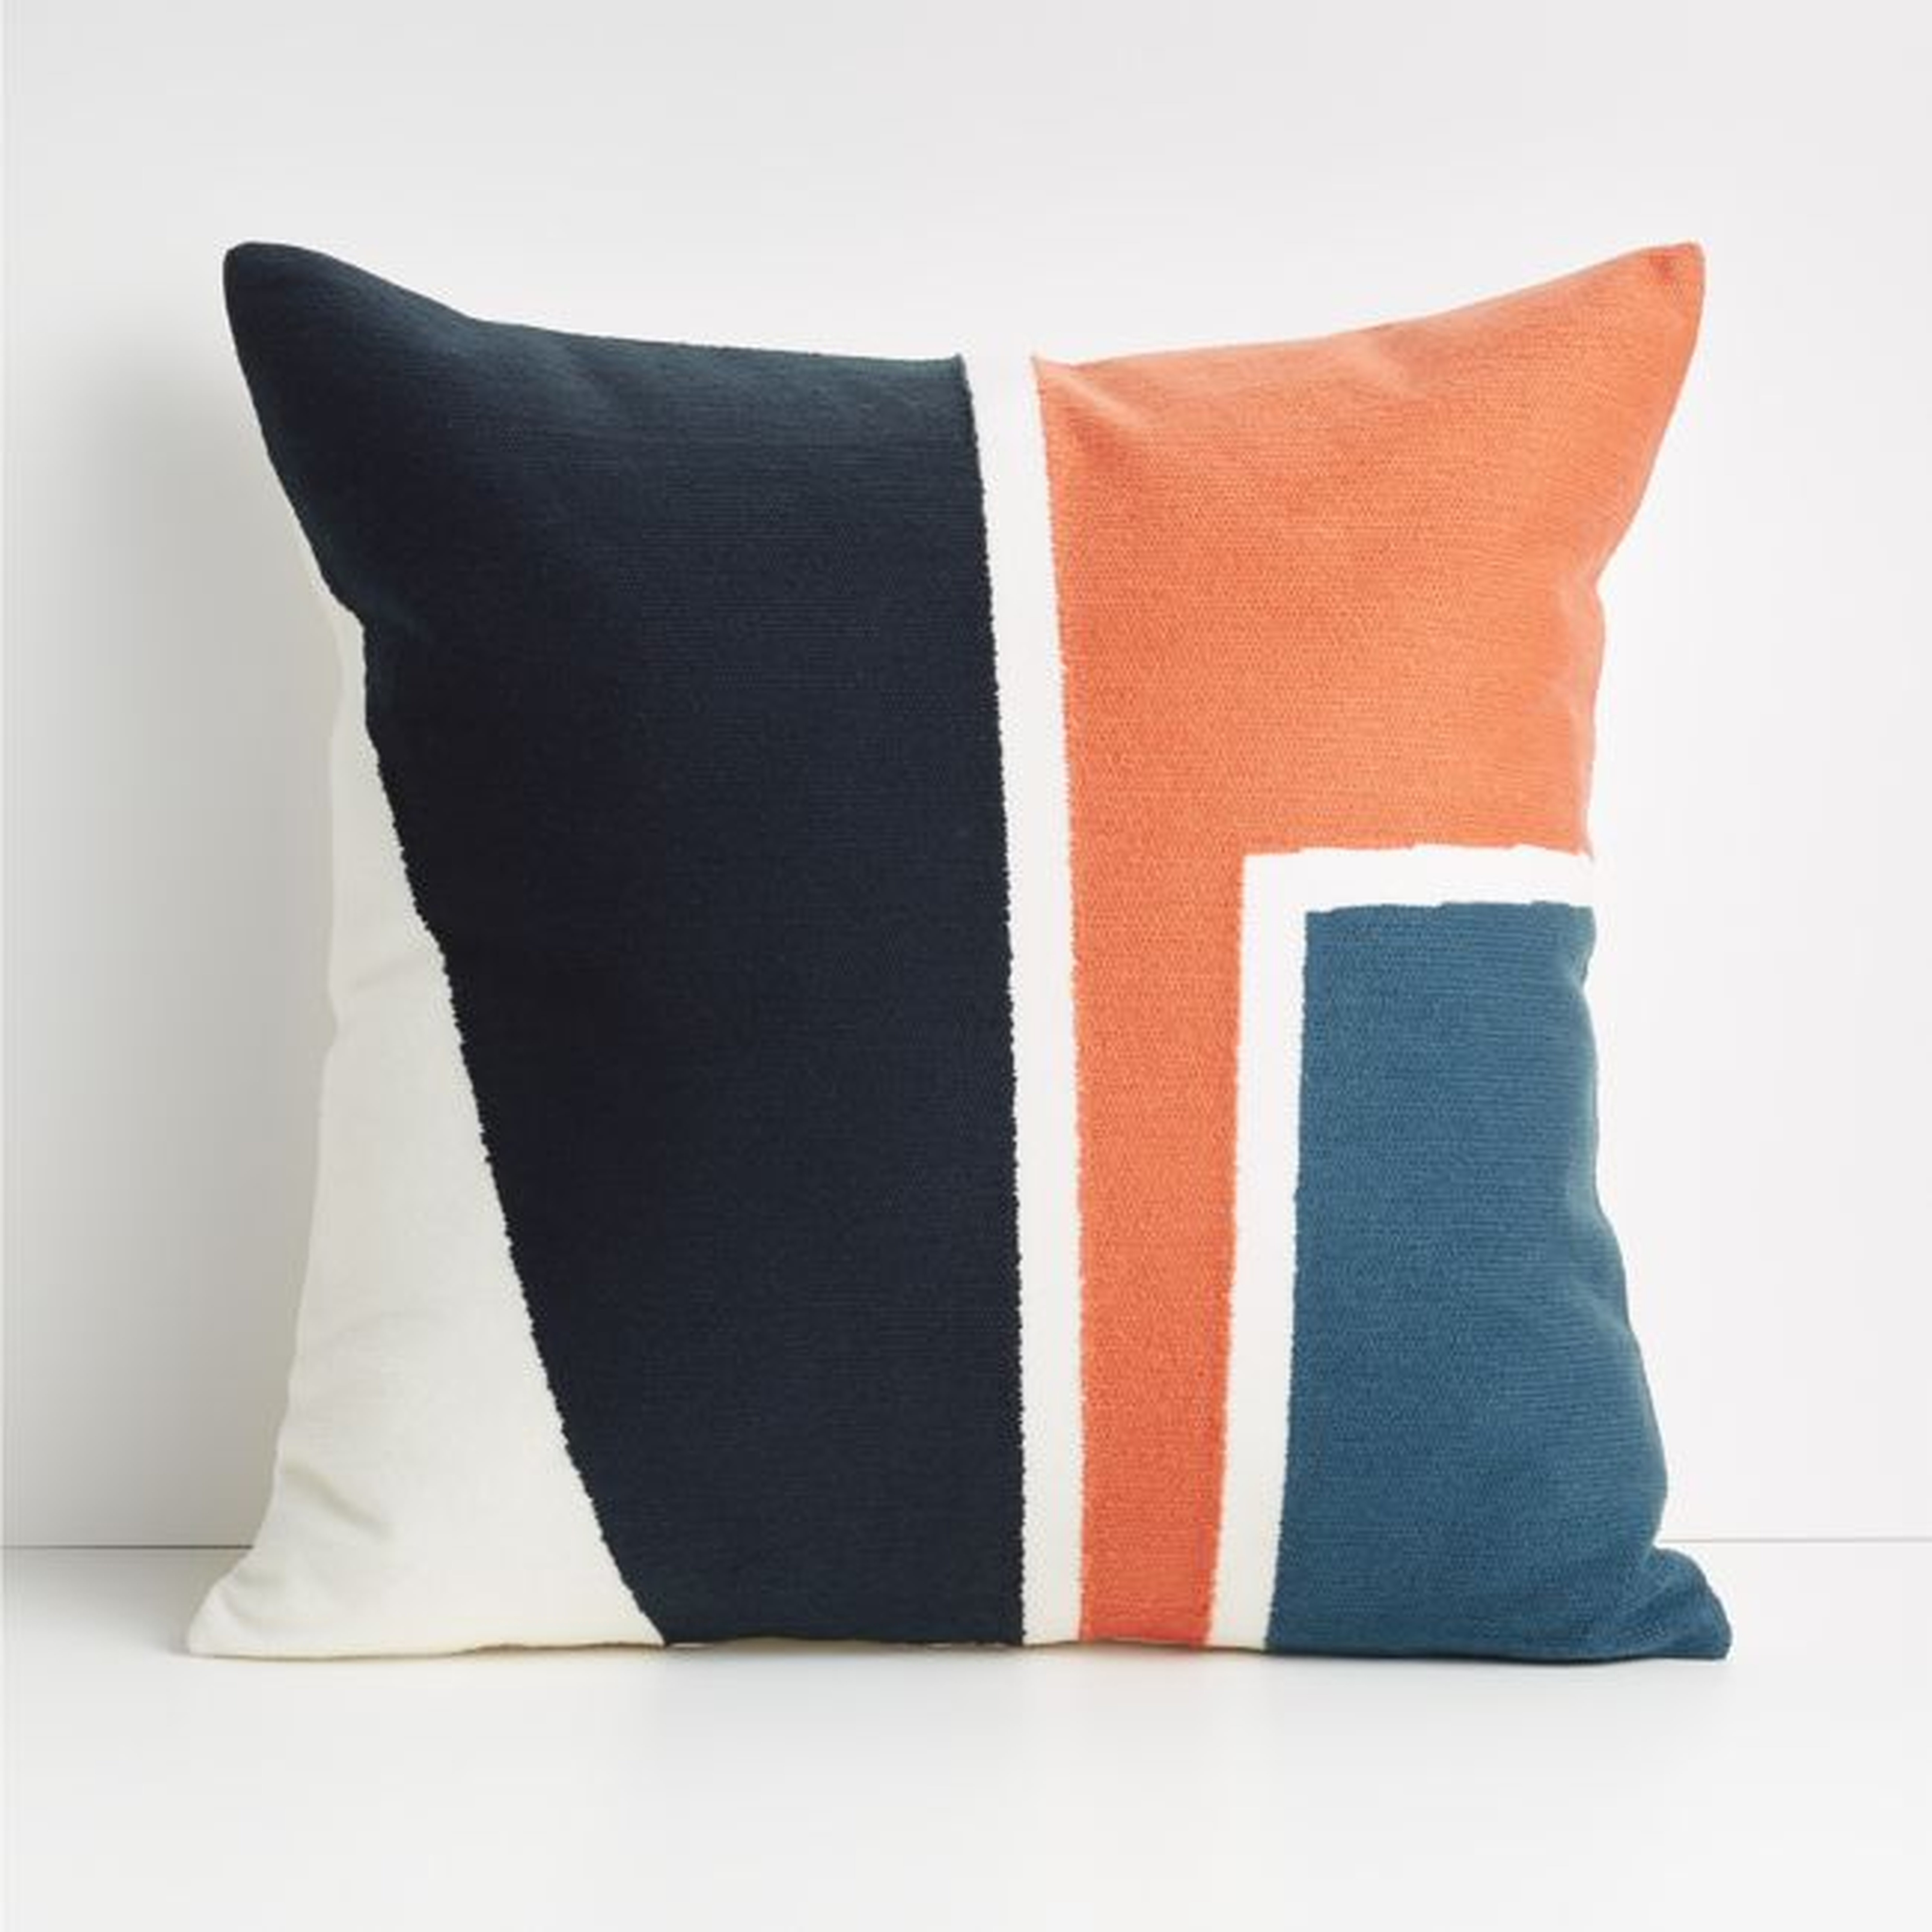 Jenda 20" Colorblock Pillow with Down-Alternative Insert - Crate and Barrel